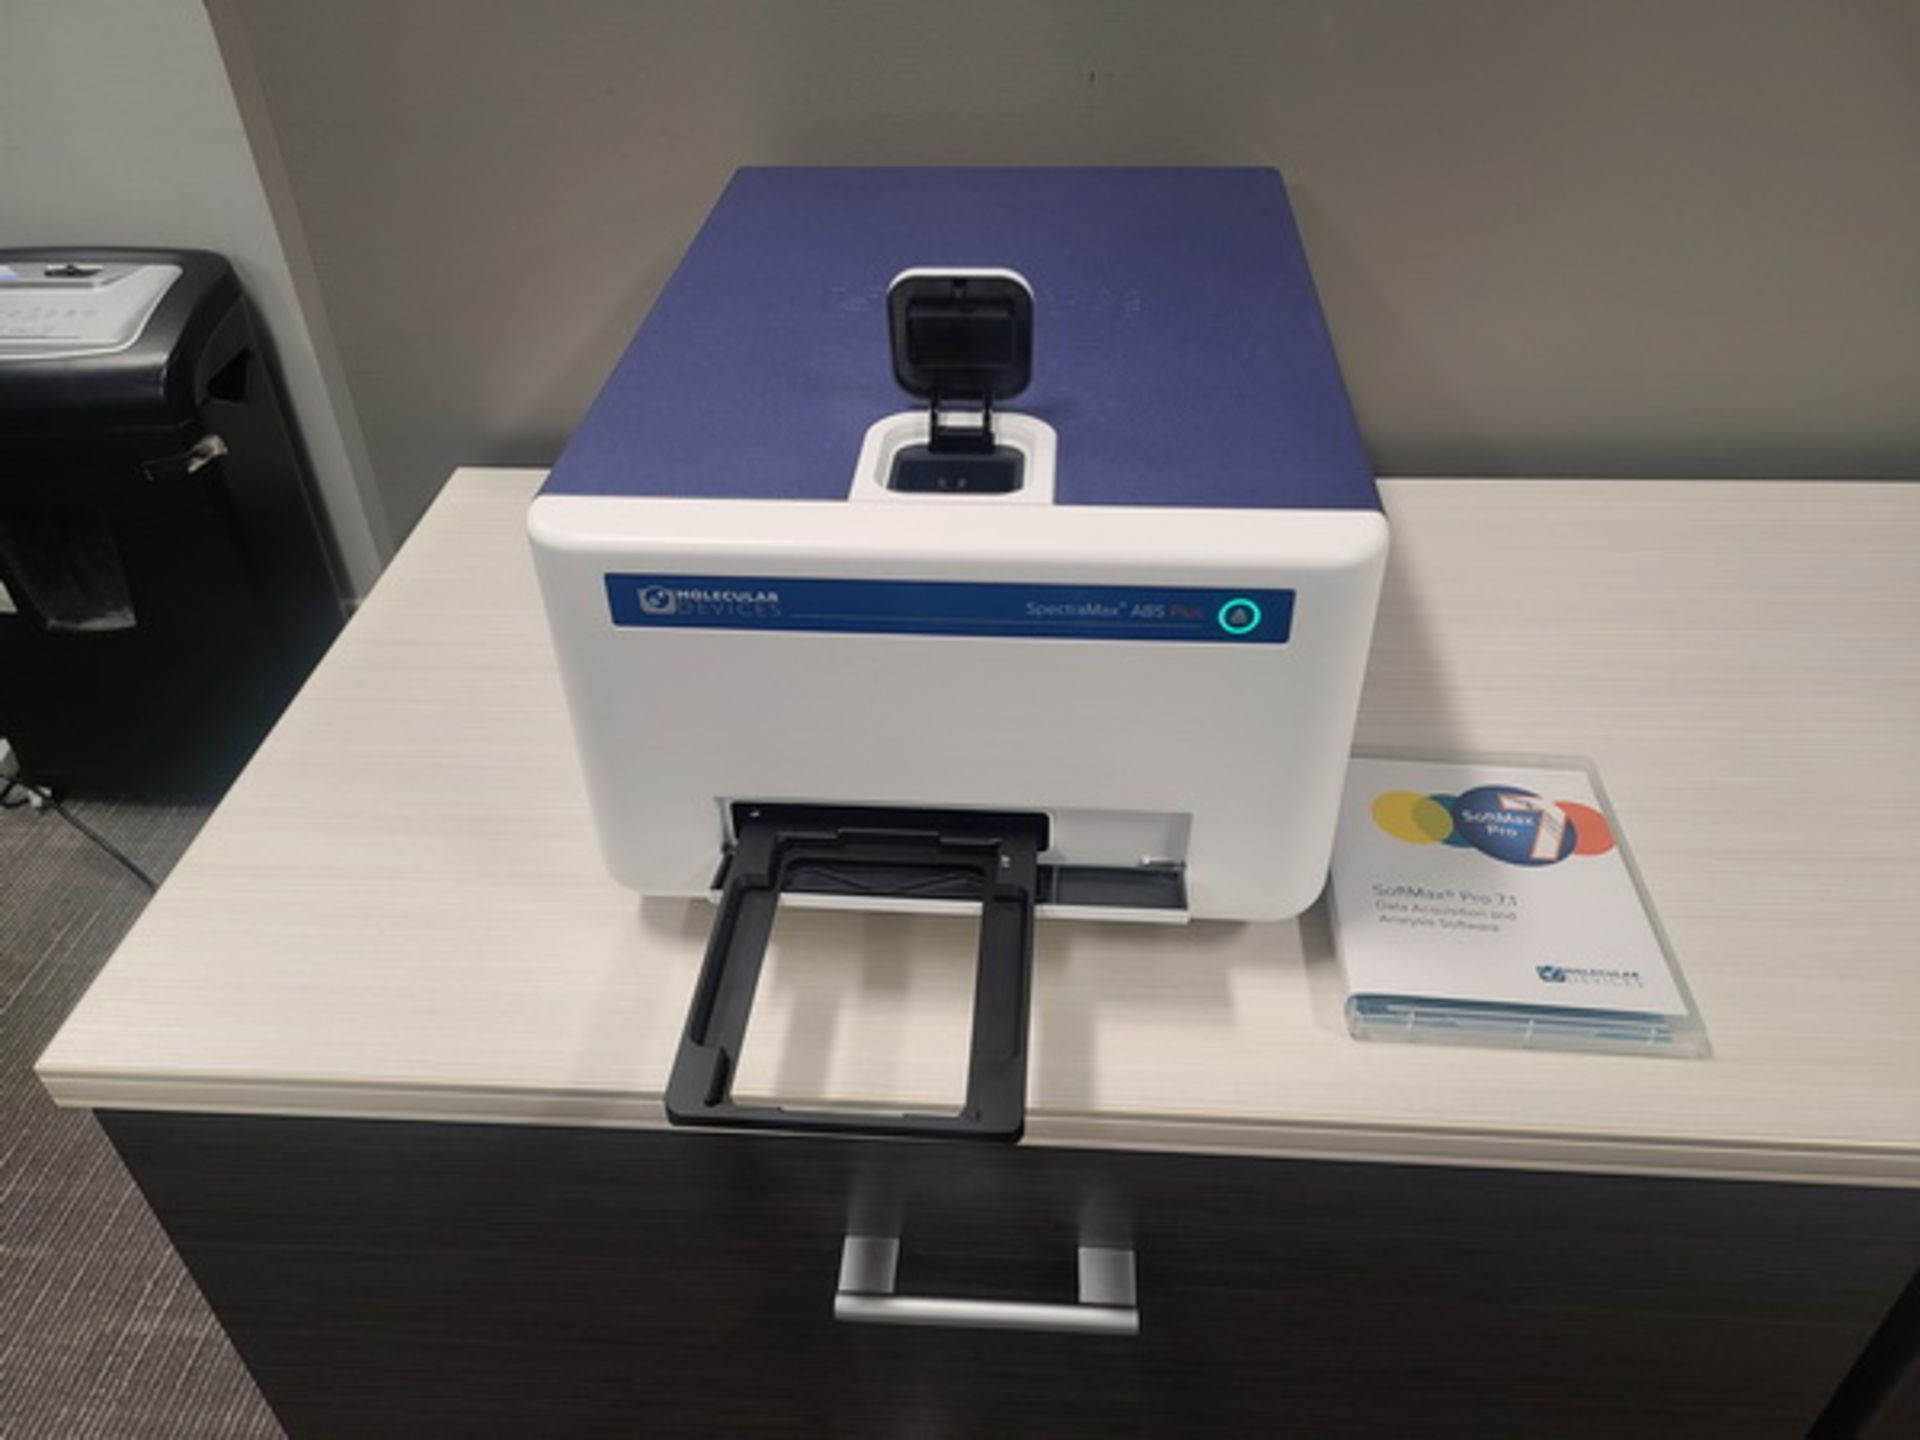 Molecular Devices SpectraMax ABS Plus Absorbance Microplate Reader, S/N ABP01300 with - Image 3 of 10